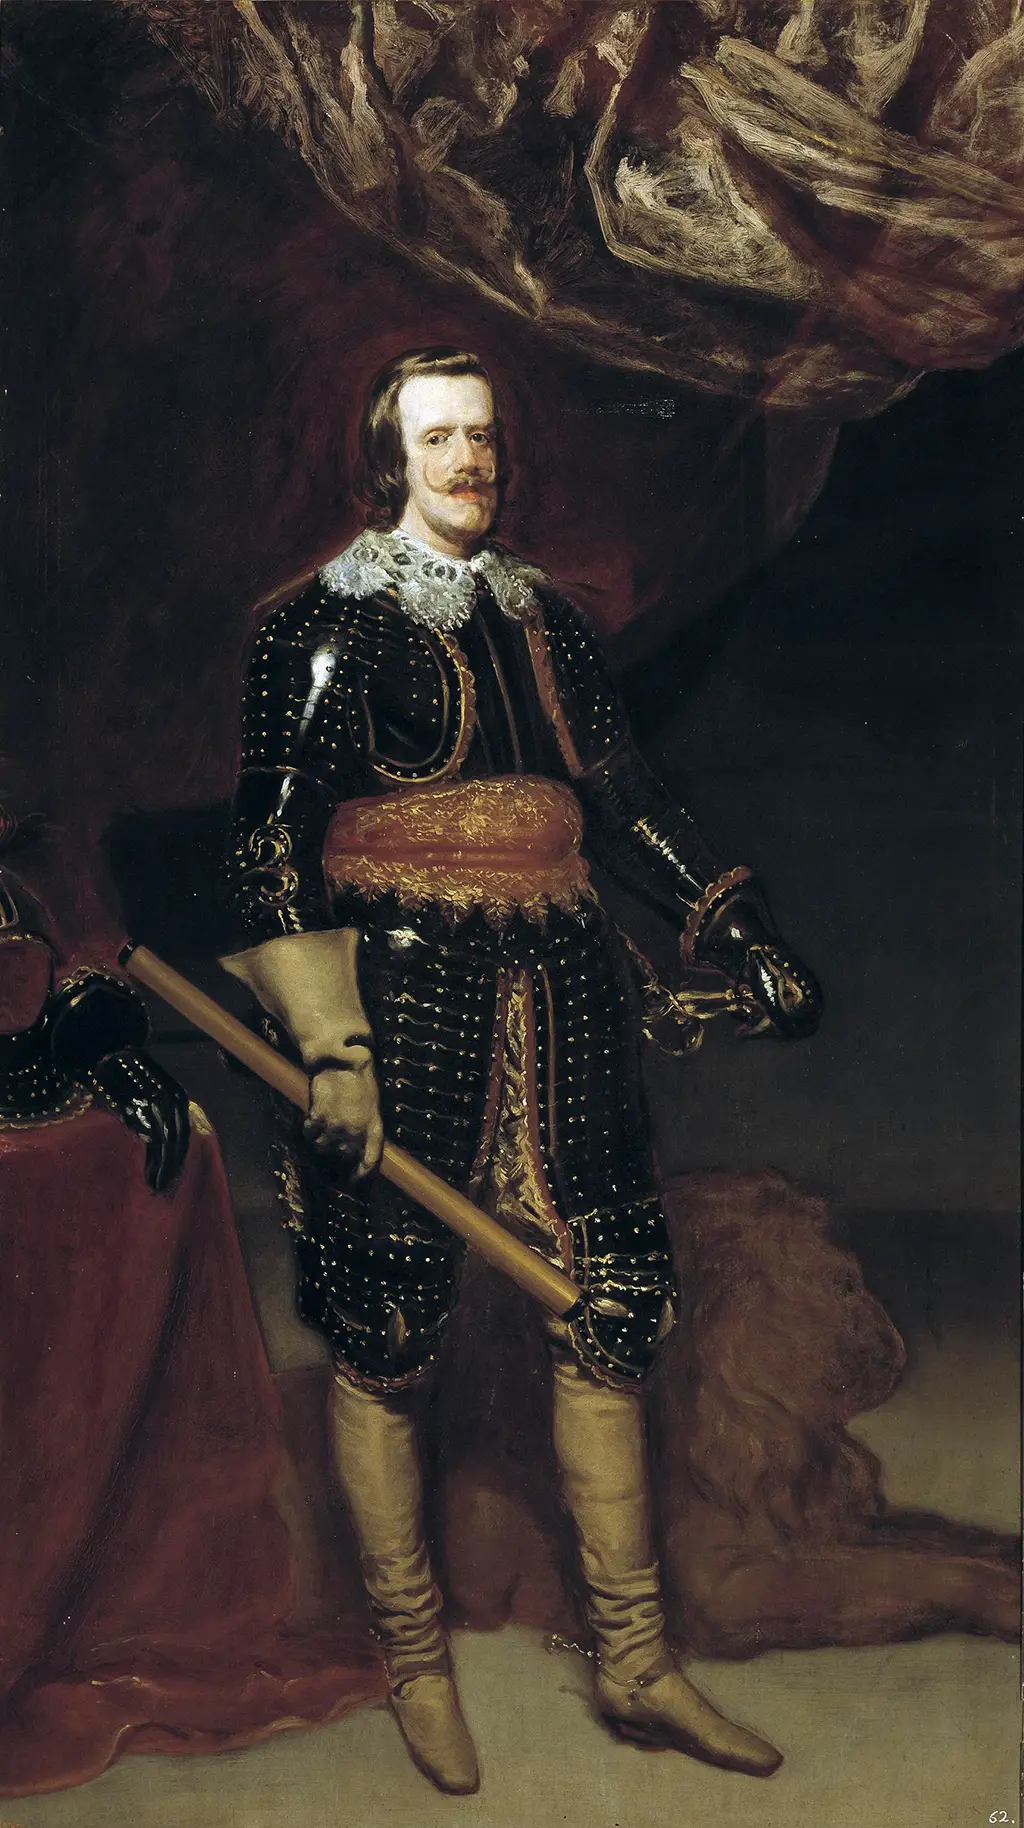 Philip IV in Armour, with a Lion at his Feet in Detail Diego Velazquez